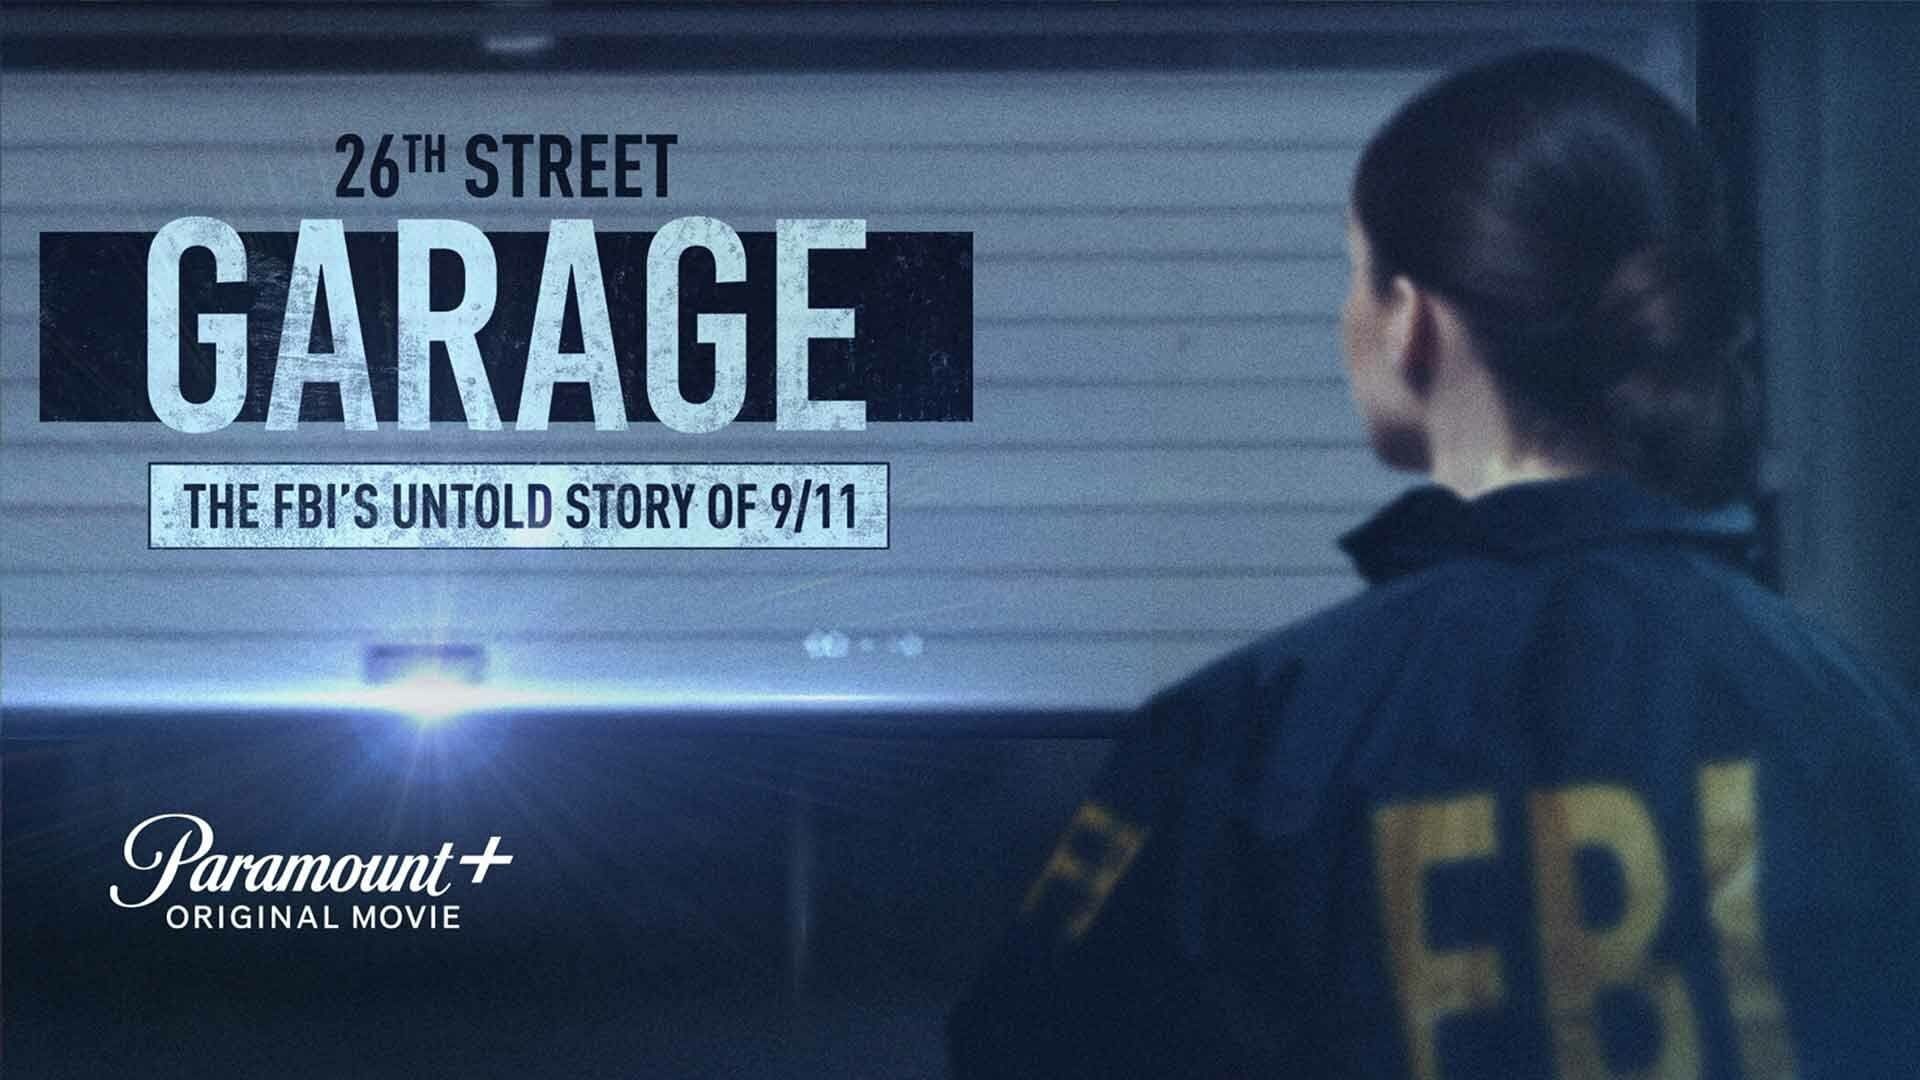 26th Street Garage: The FBI's Untold Story of 9/11 background